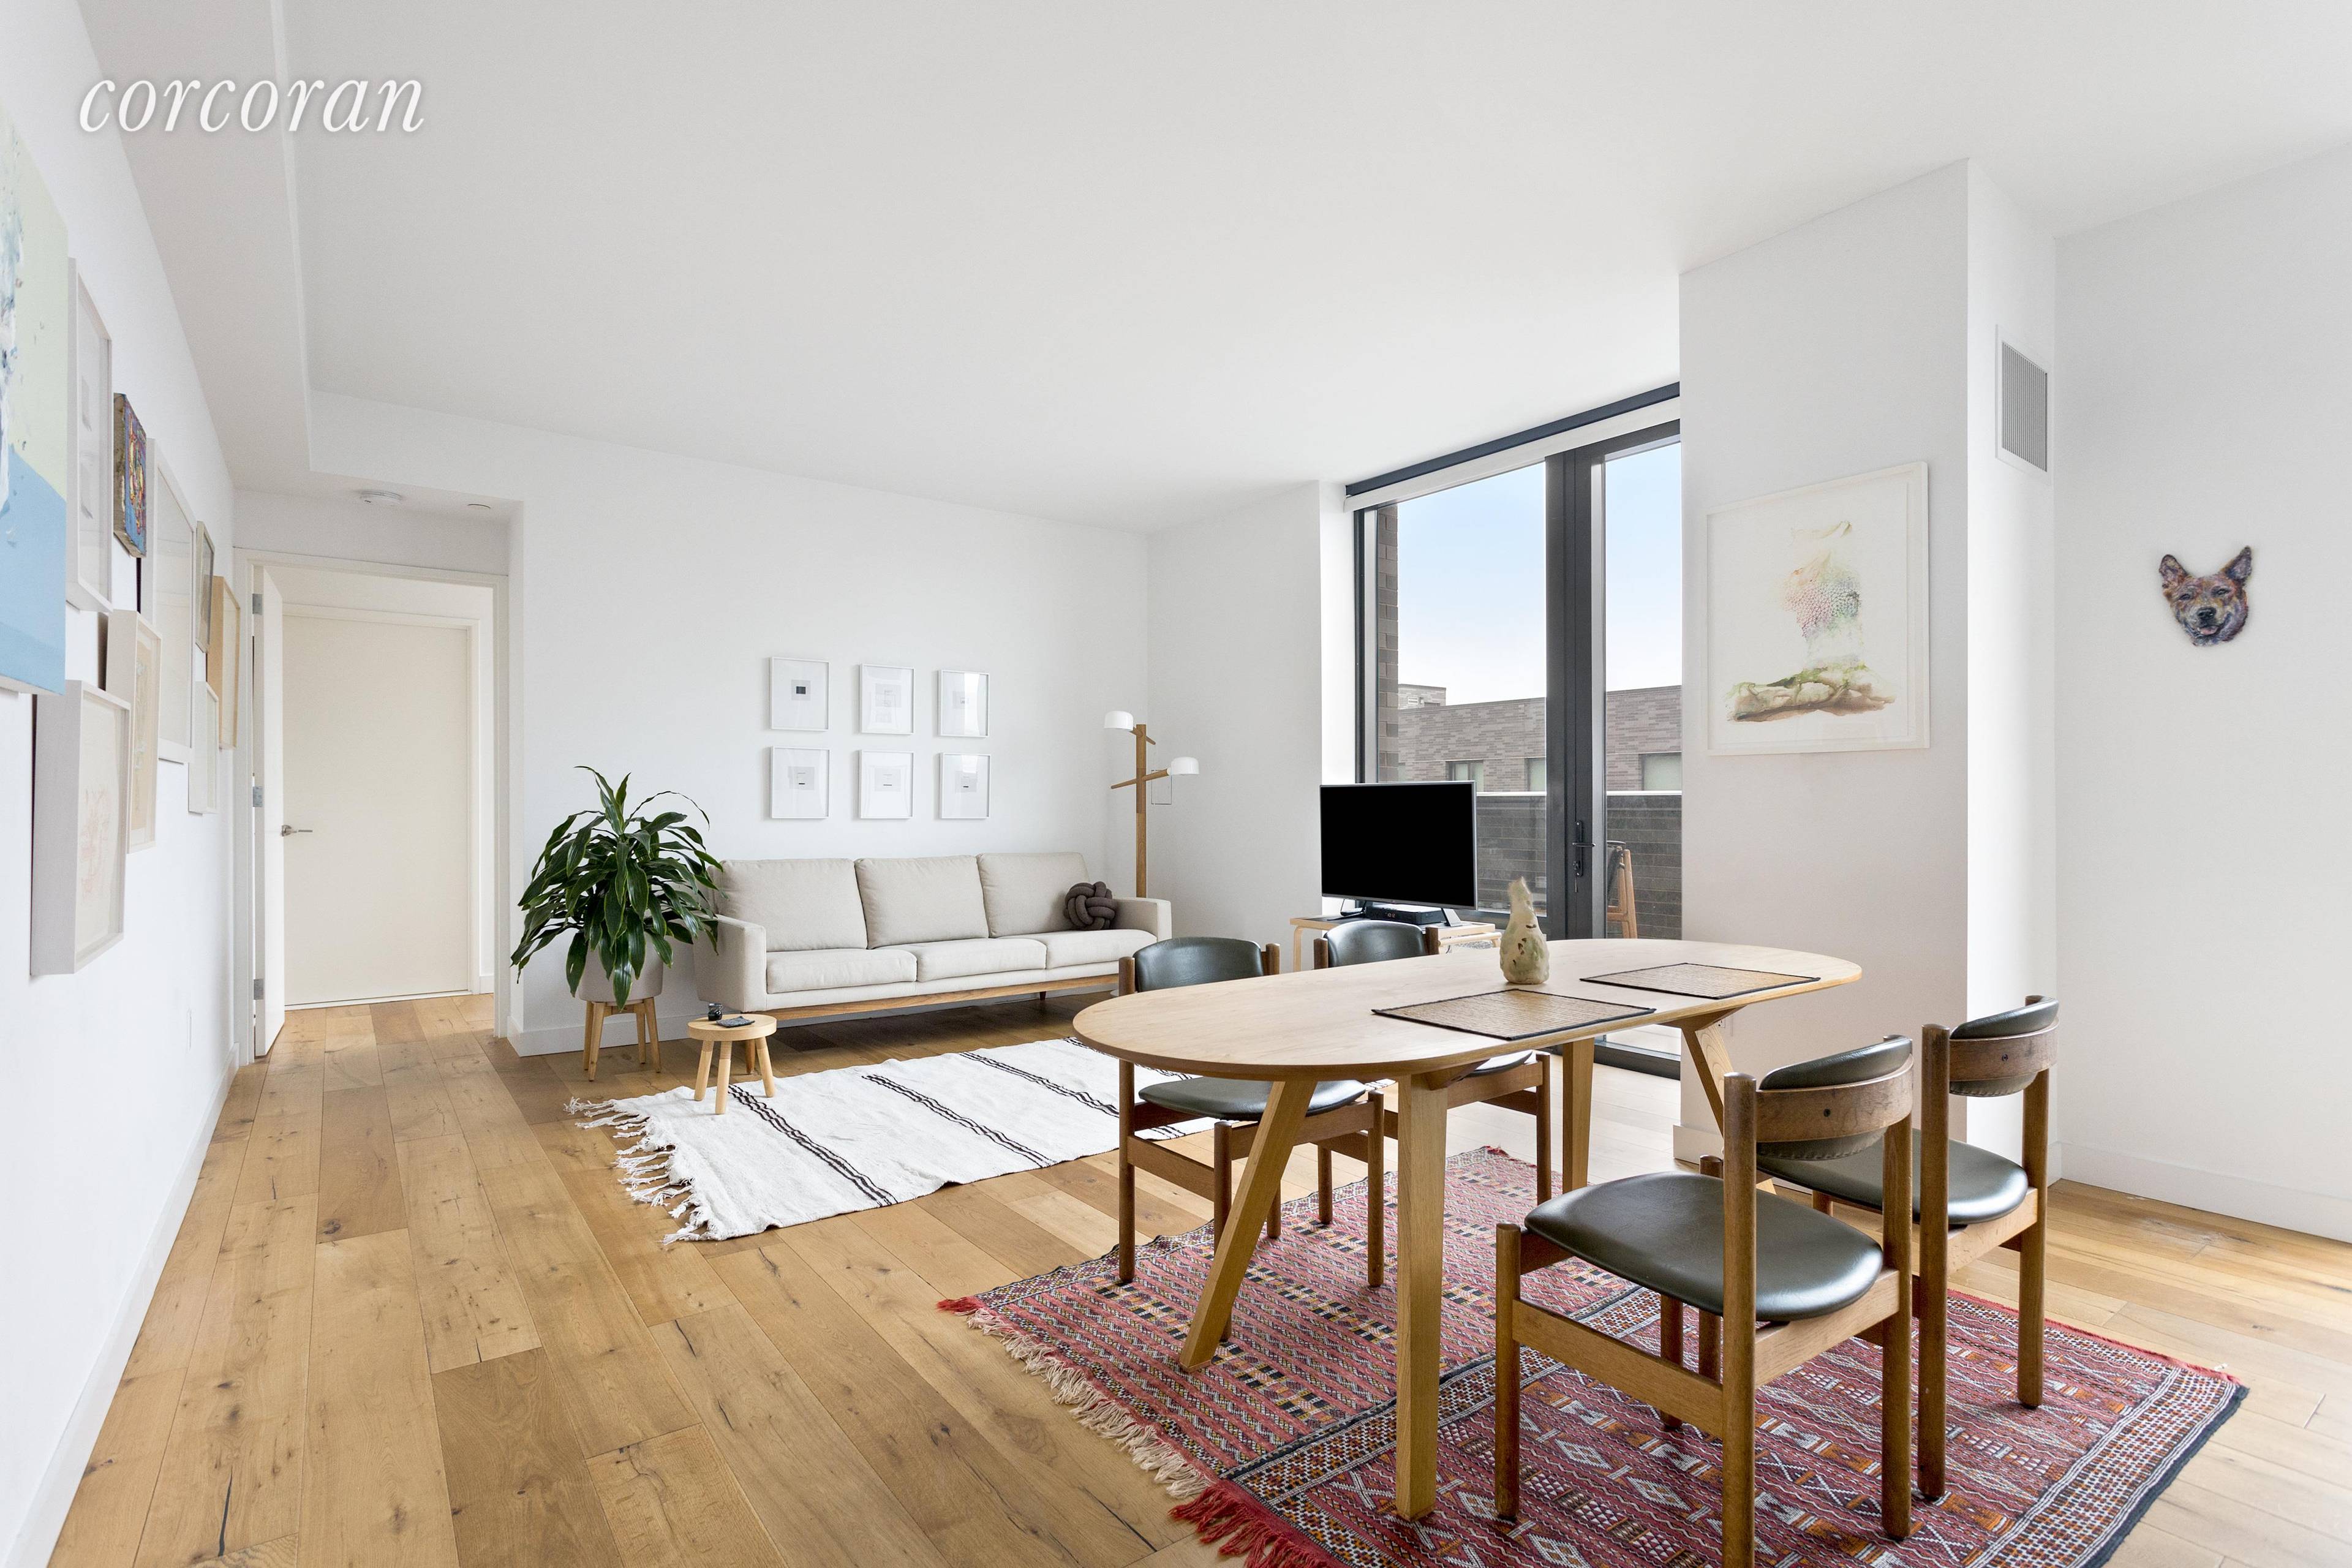 23 West 116th Street 9C is AVAILABLE SEPTEMBER 15TH.